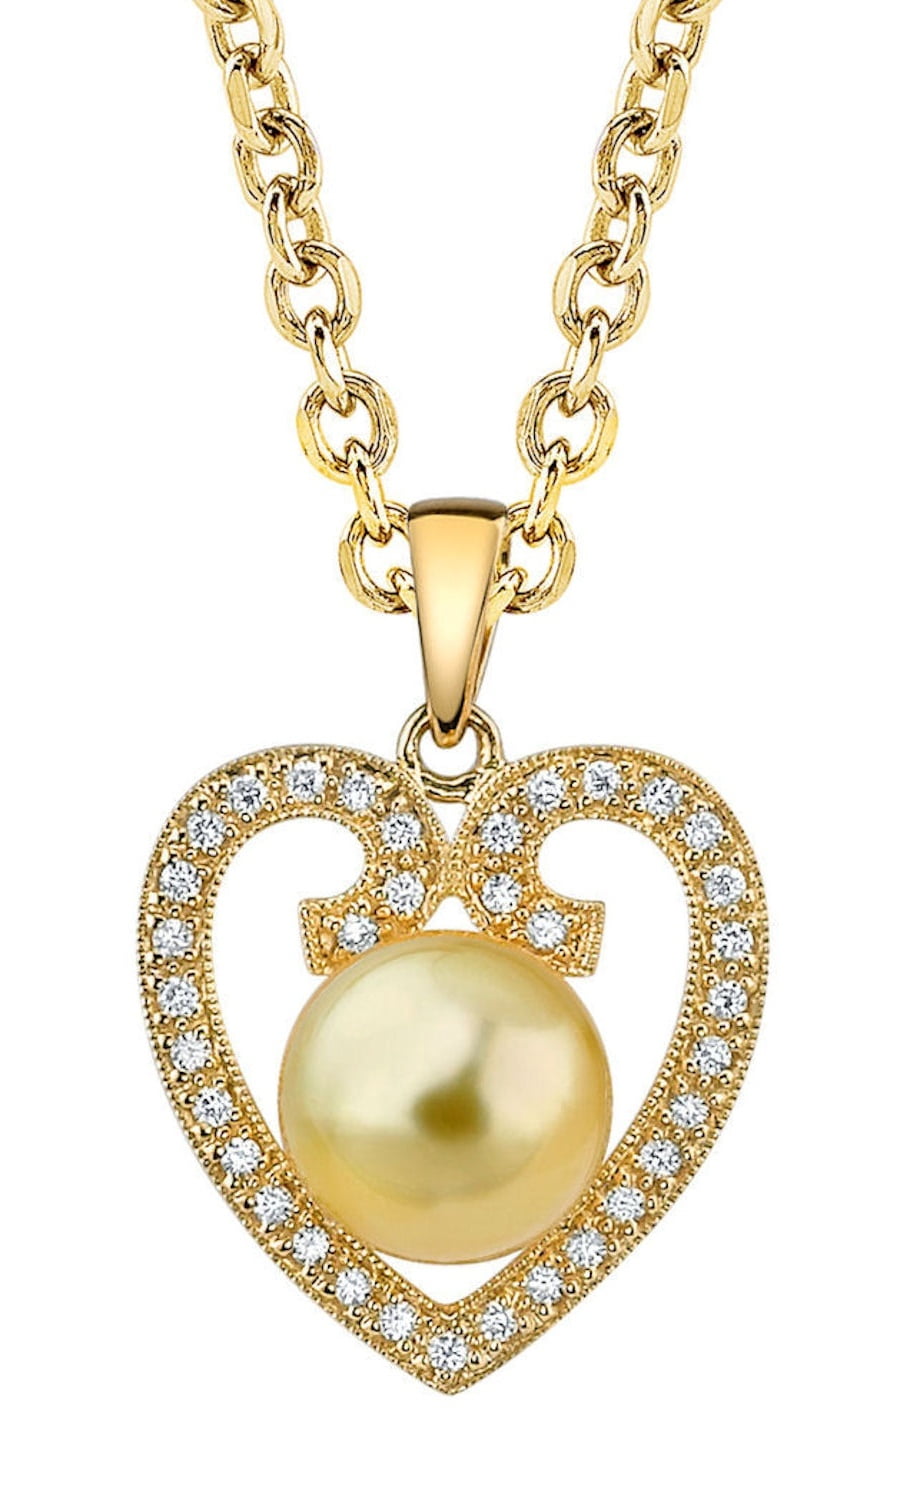 Heart Shaped Golden South Sea Cultured Pearl & Diamond Pendant Necklace in 18K Gold